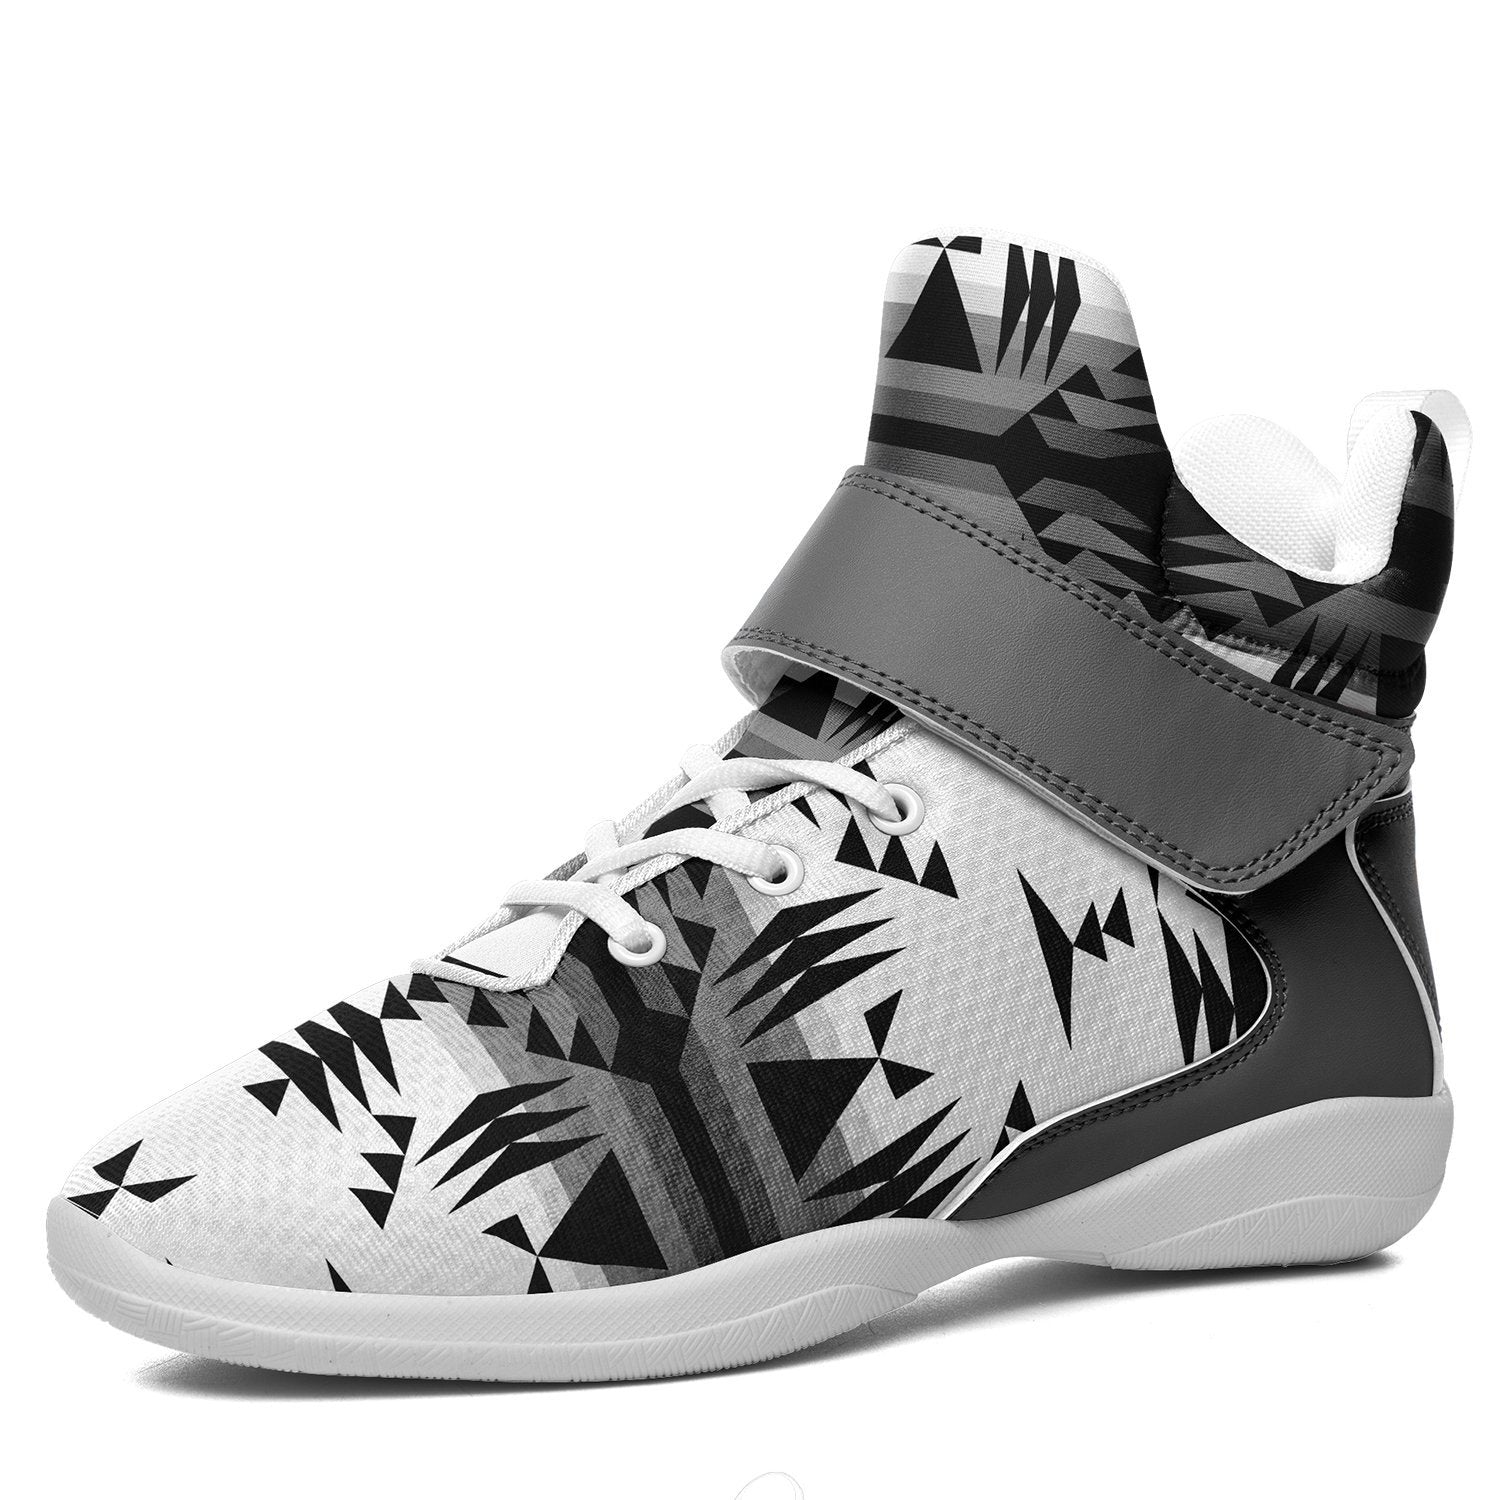 Between the Mountains White and Black Kid's Ipottaa Basketball / Sport High Top Shoes 49 Dzine US Child 12.5 / EUR 30 White Sole with Gray Strap 